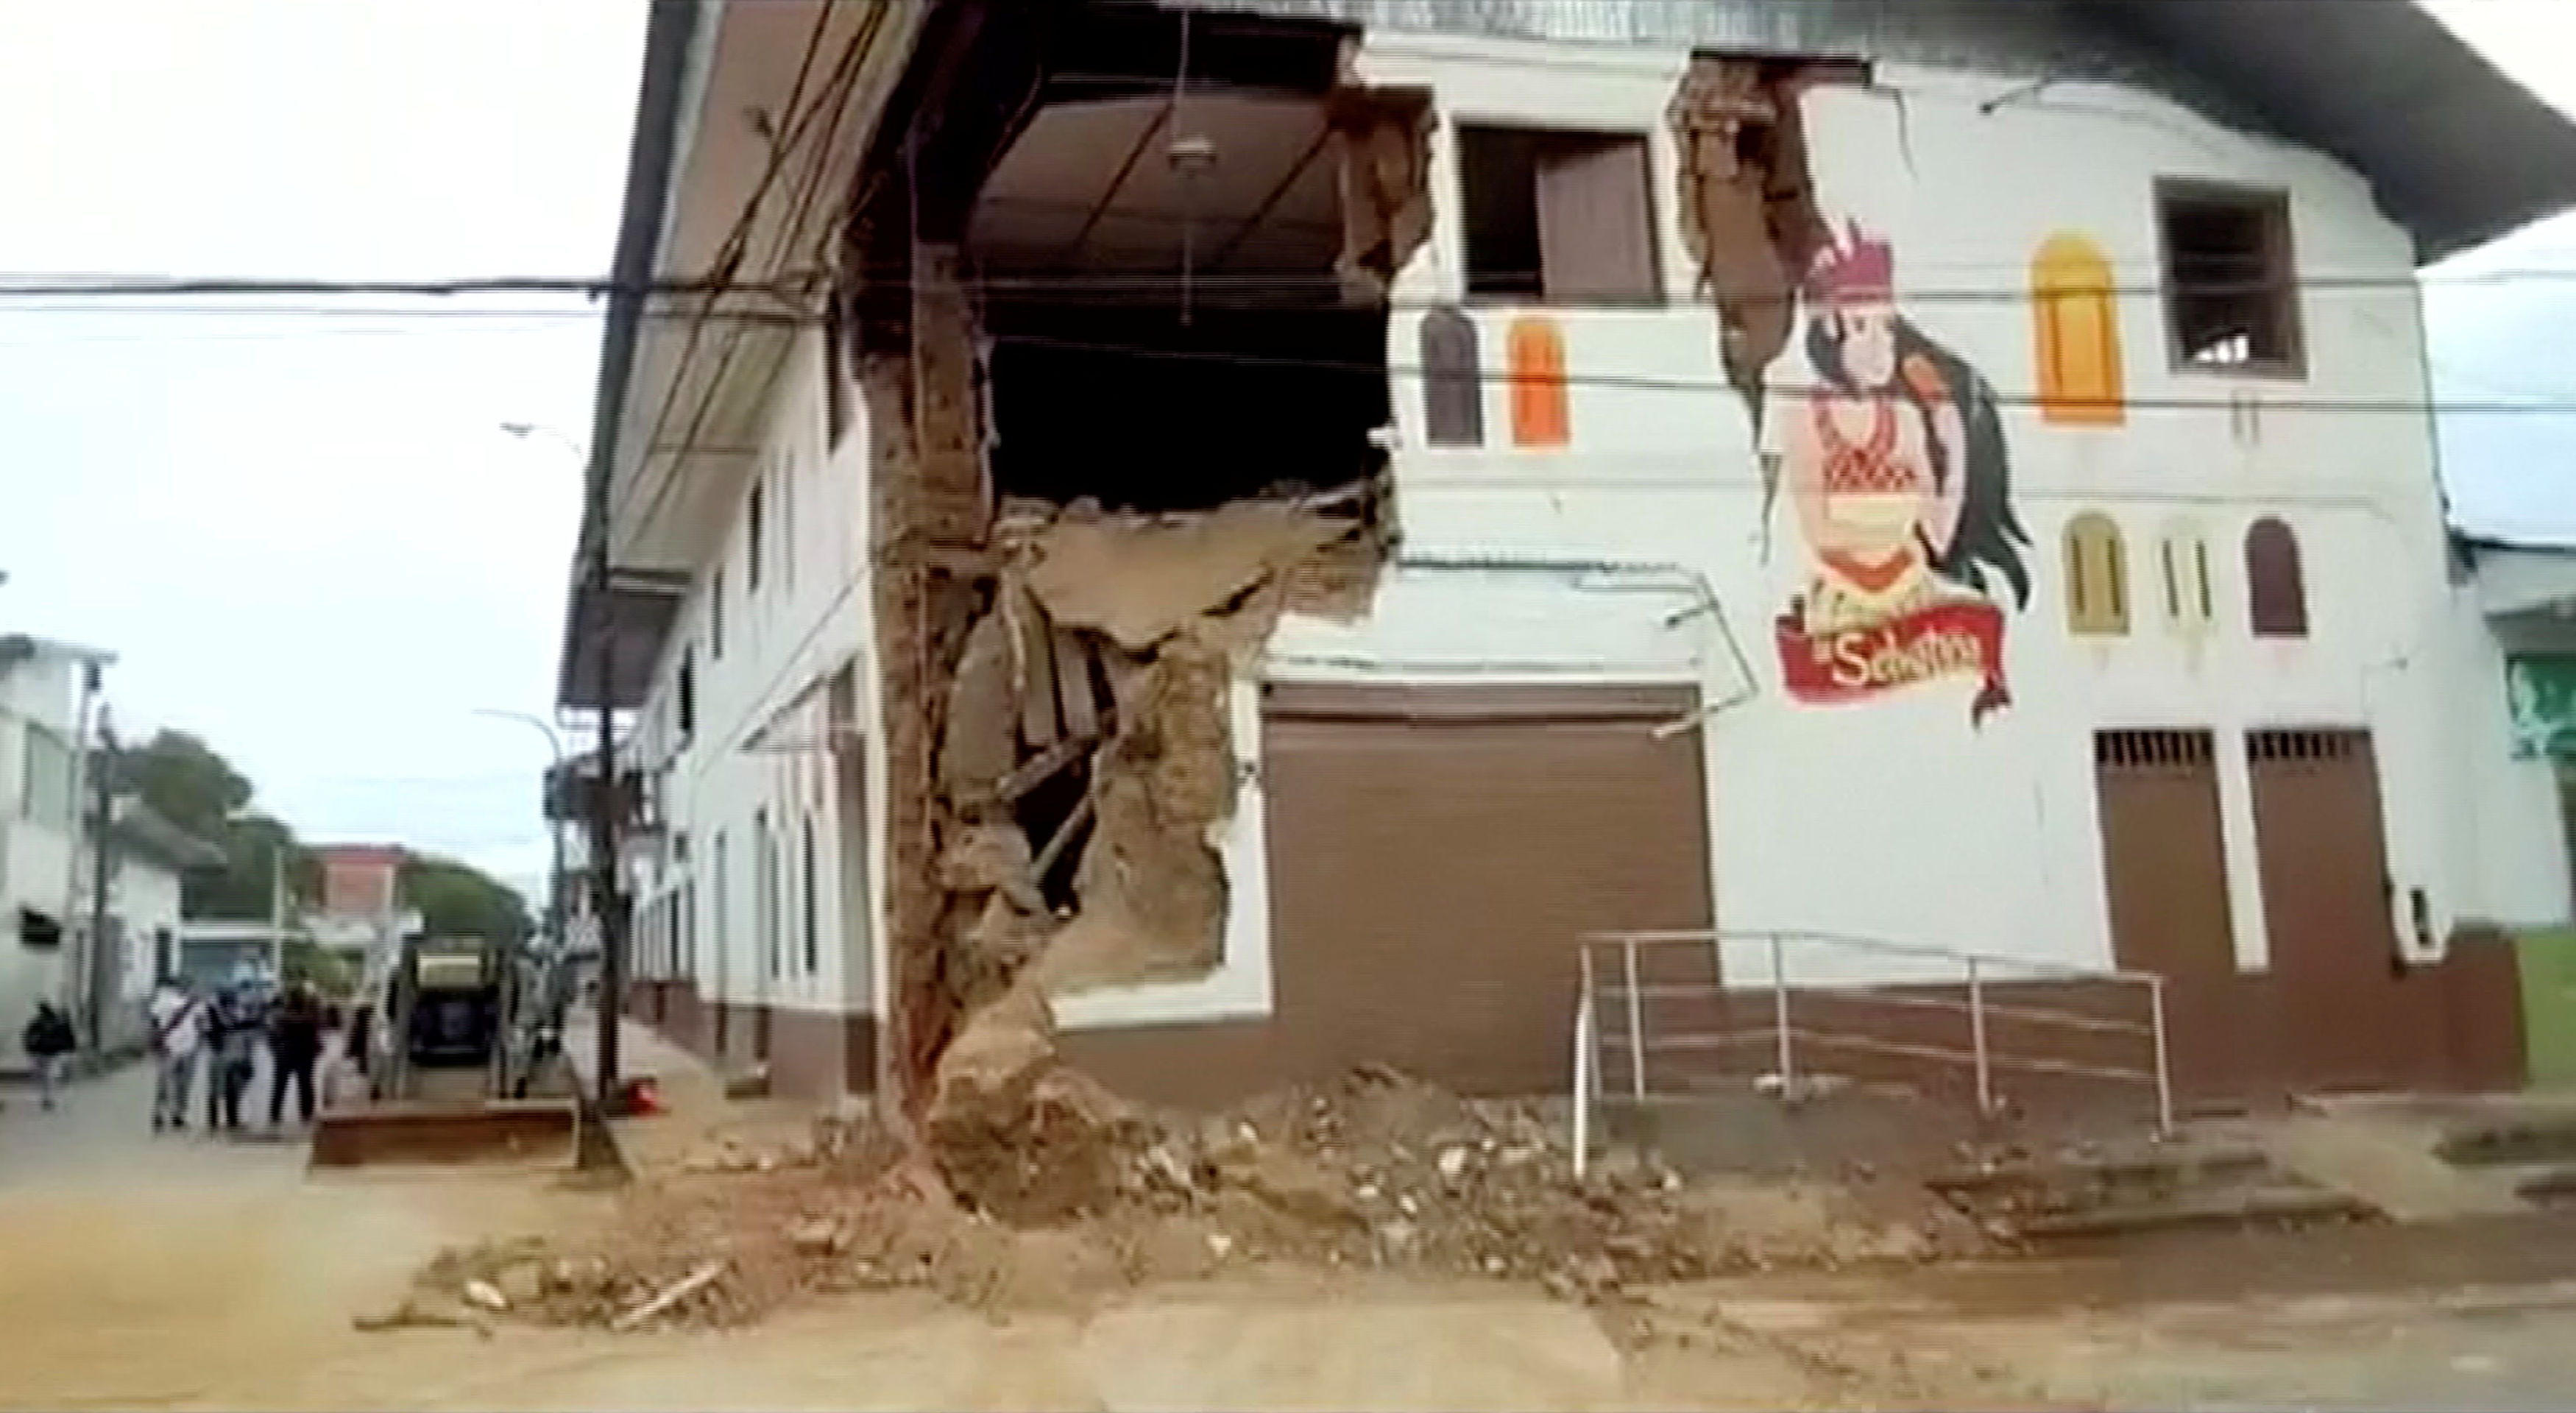 A damaged building is seen after an earthquake in Yurimaguas